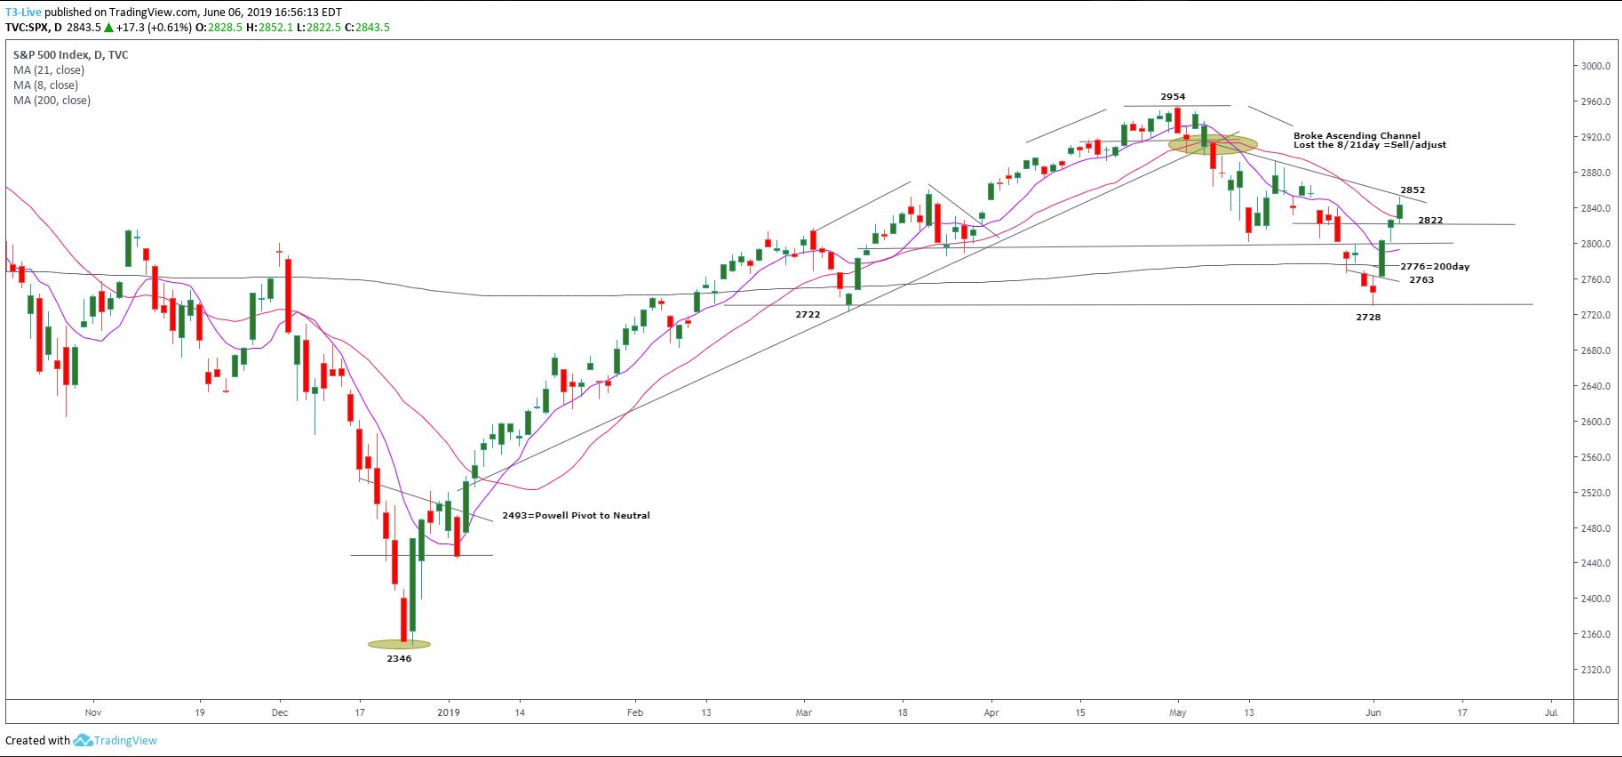 S&P 500 Index Daily